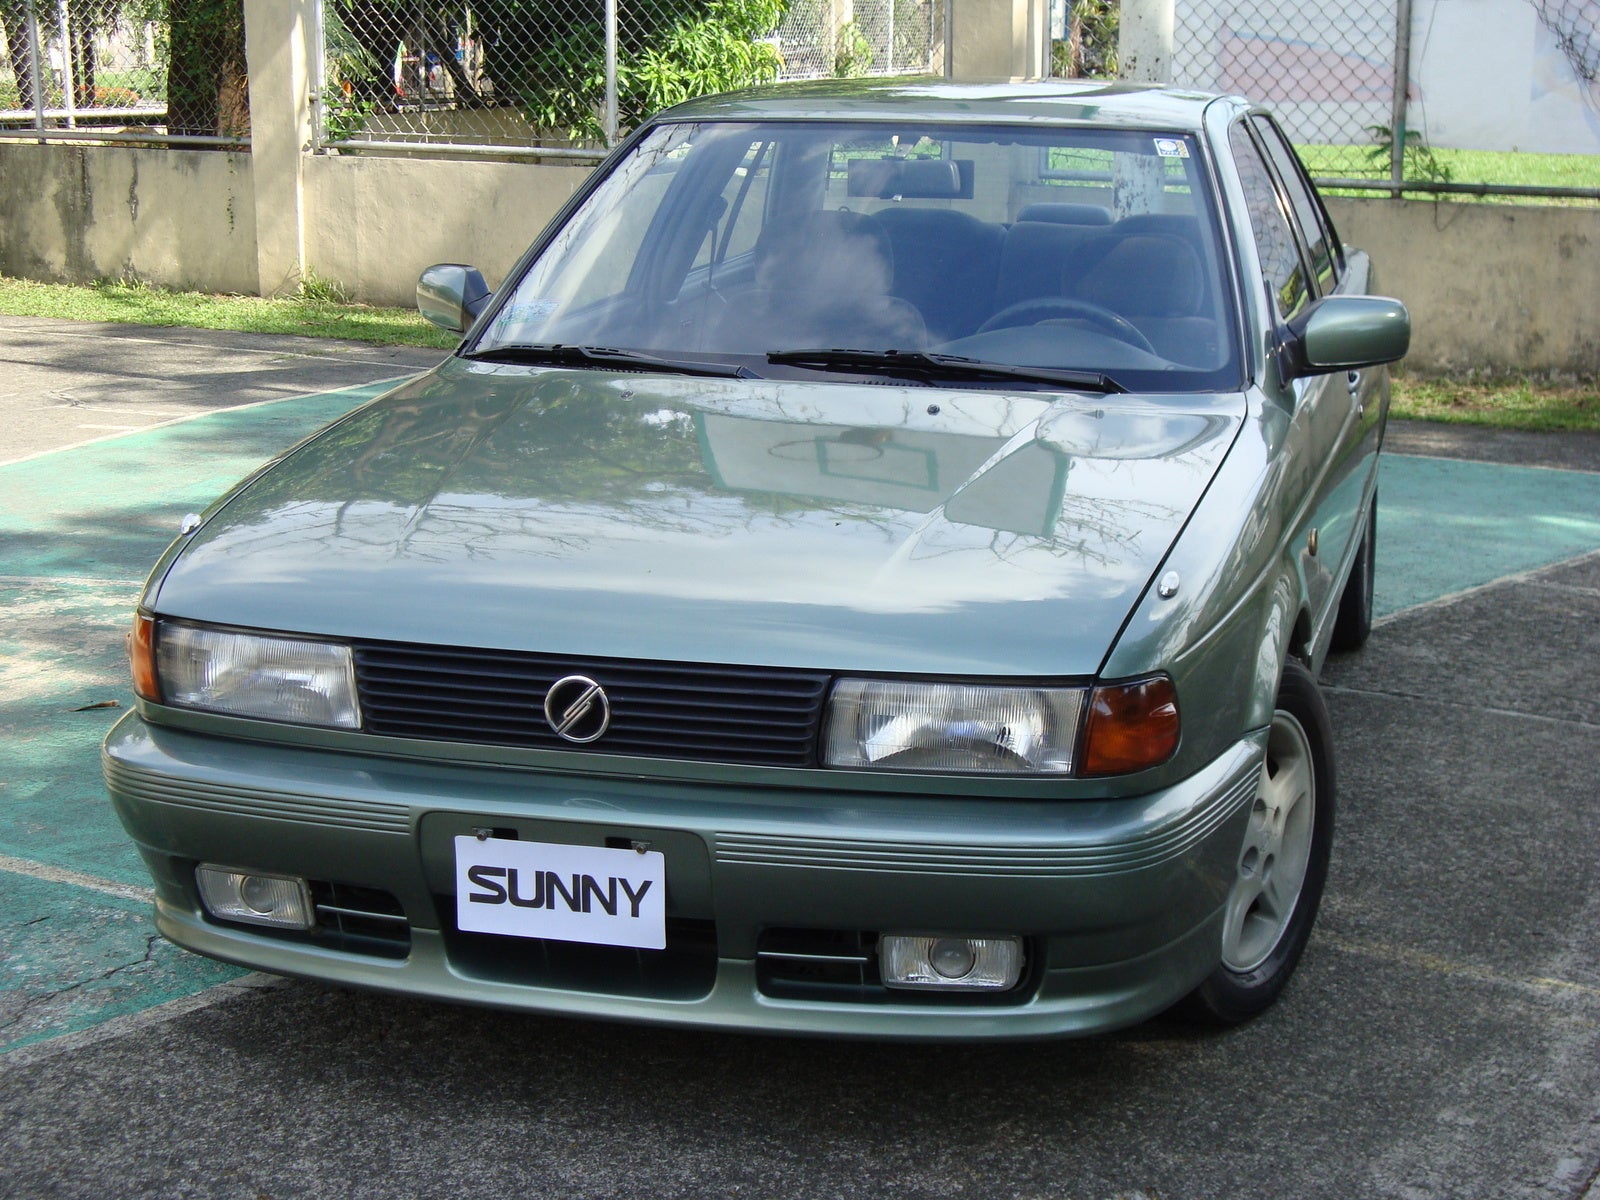 1993 Nissan Sunny Test Drive Review - CarGurus